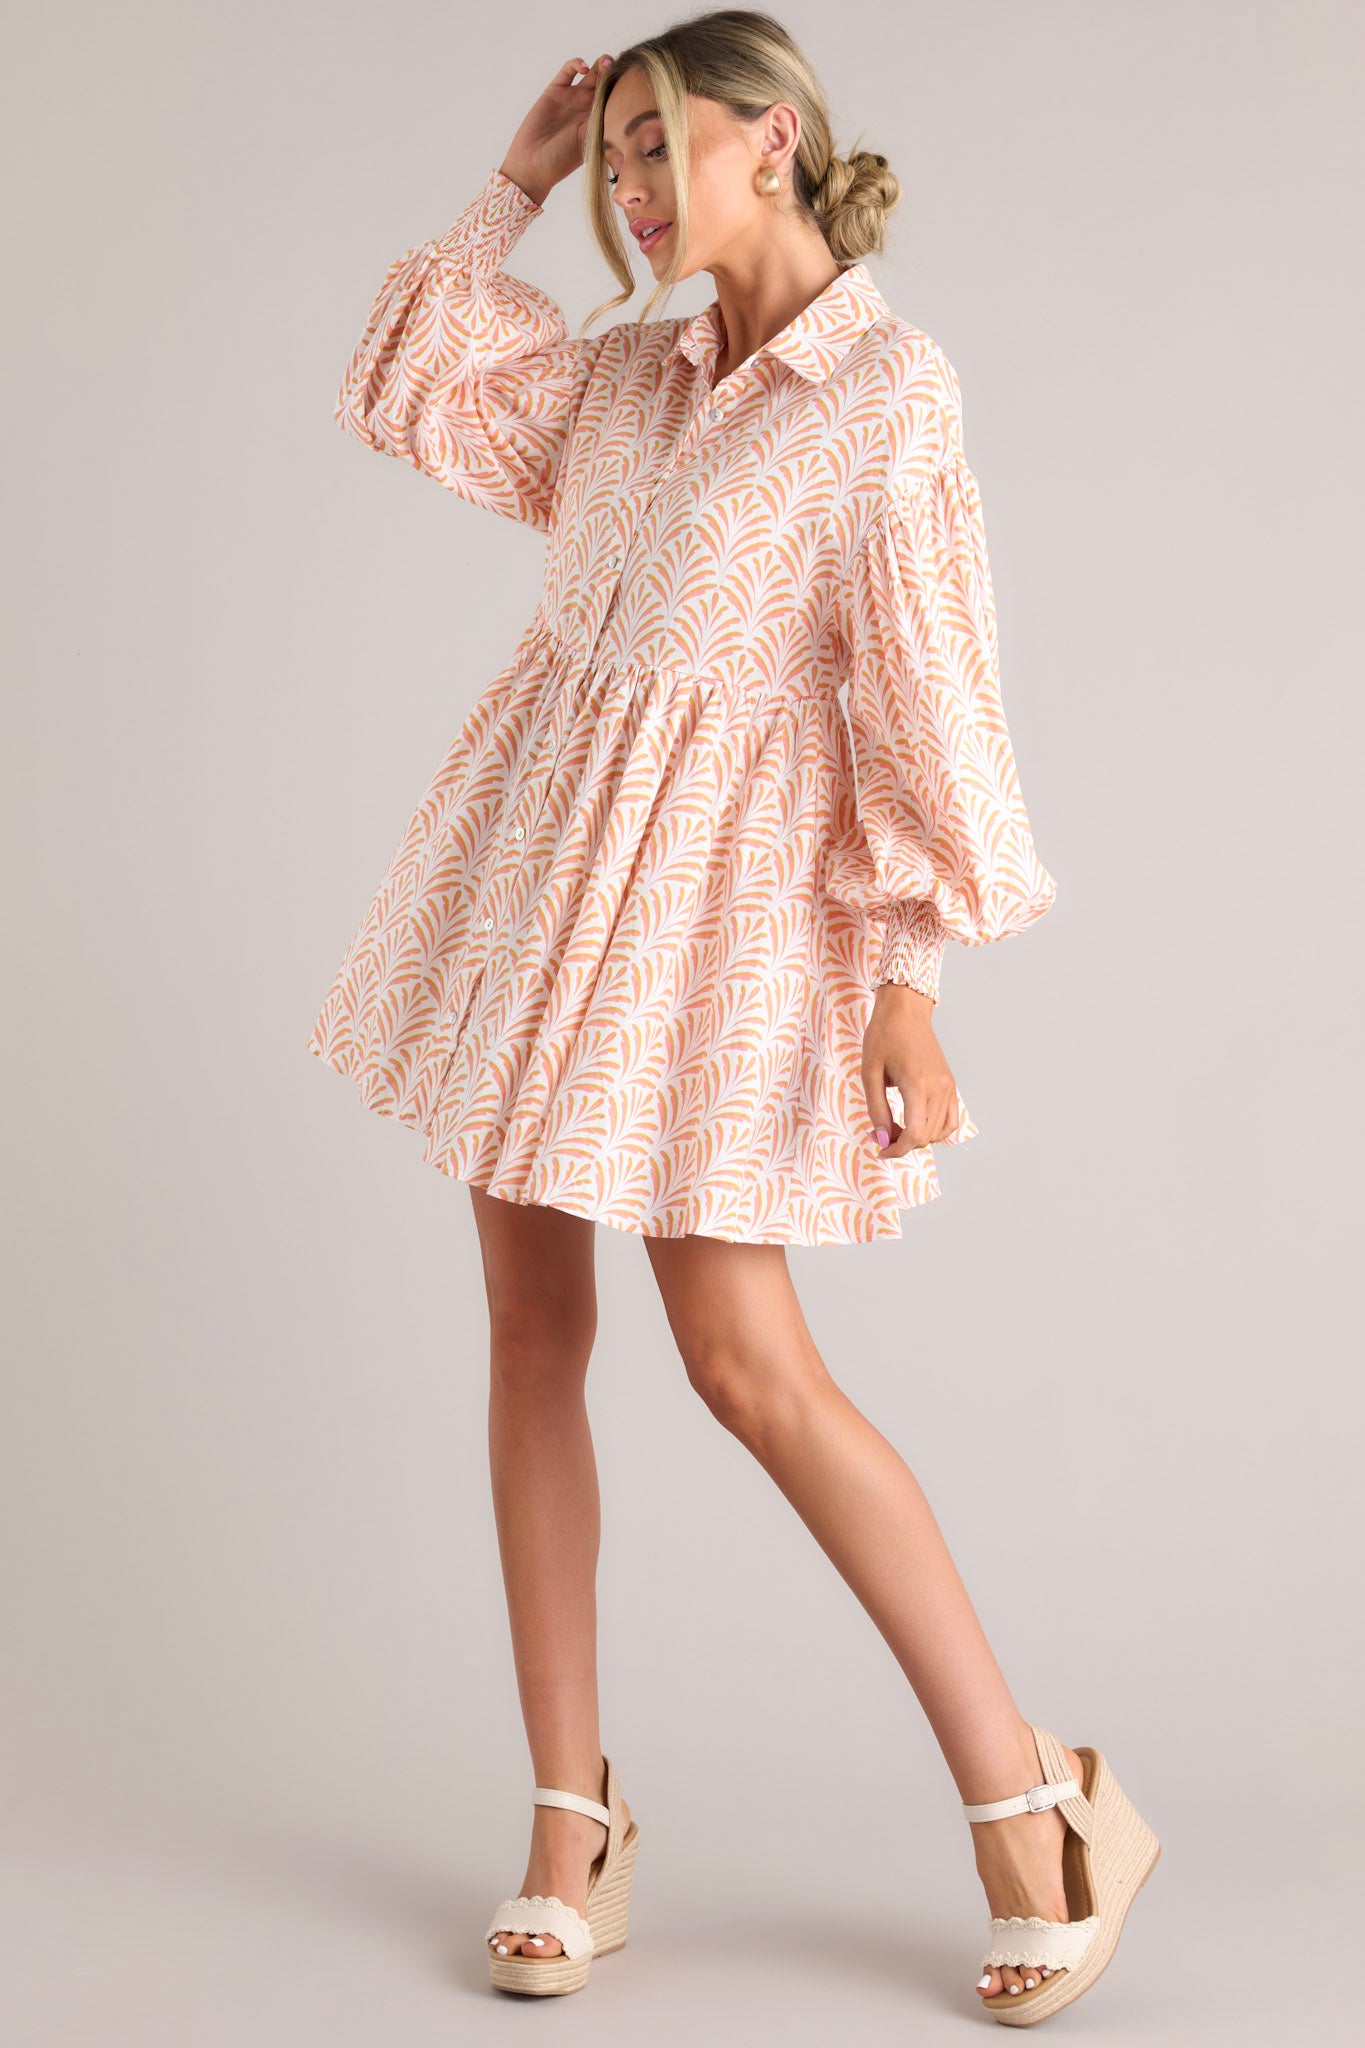 This orange and white dress features a collared neckline, functional buttons down the front, long sleeves with smocked cuffs, and a flowy, relaxed fit throughout.